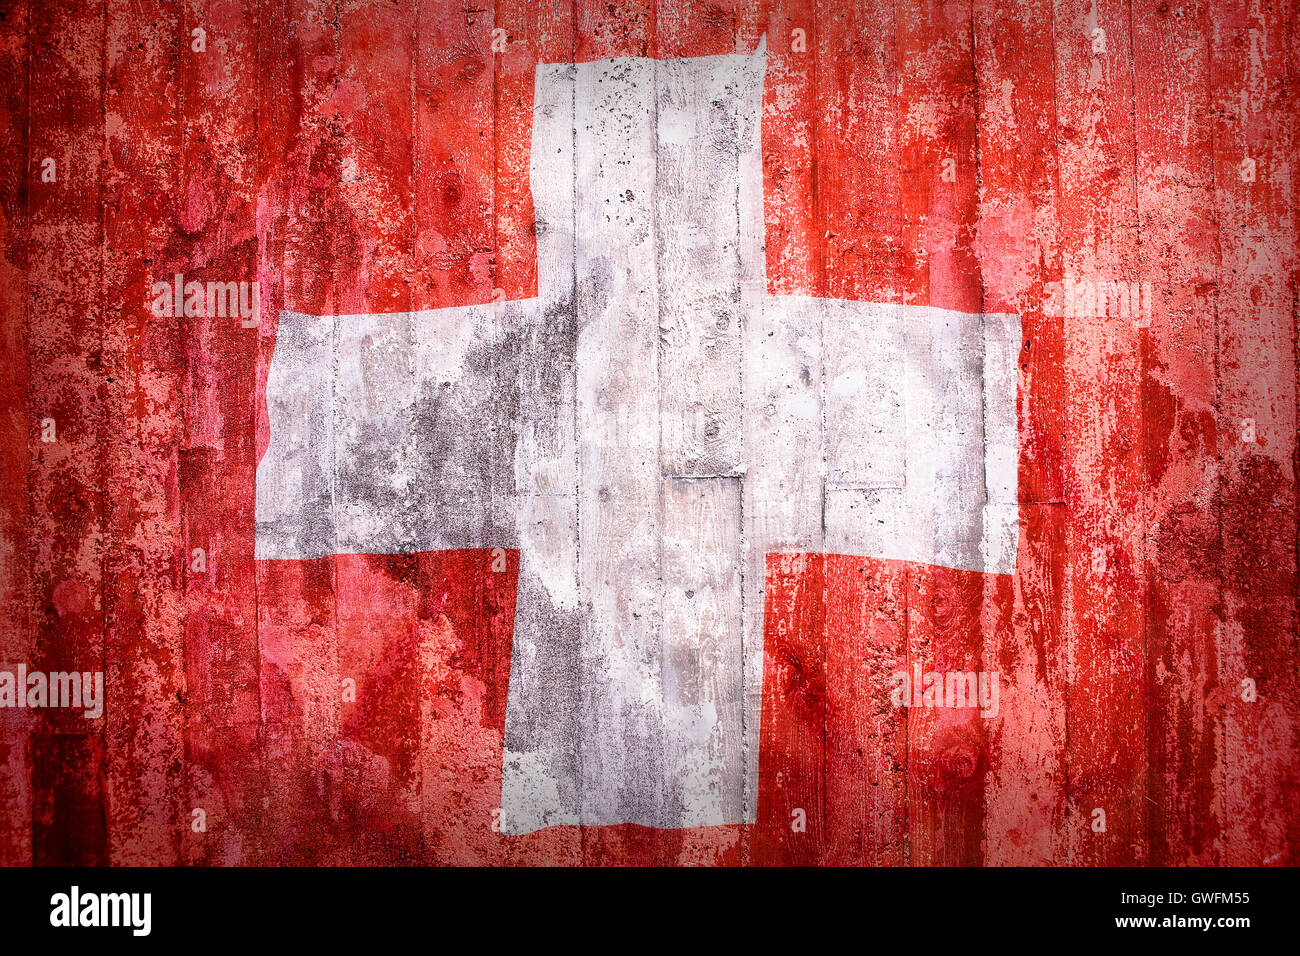 Grunge style of Switzerland flag on a brick wall for background Stock Photo